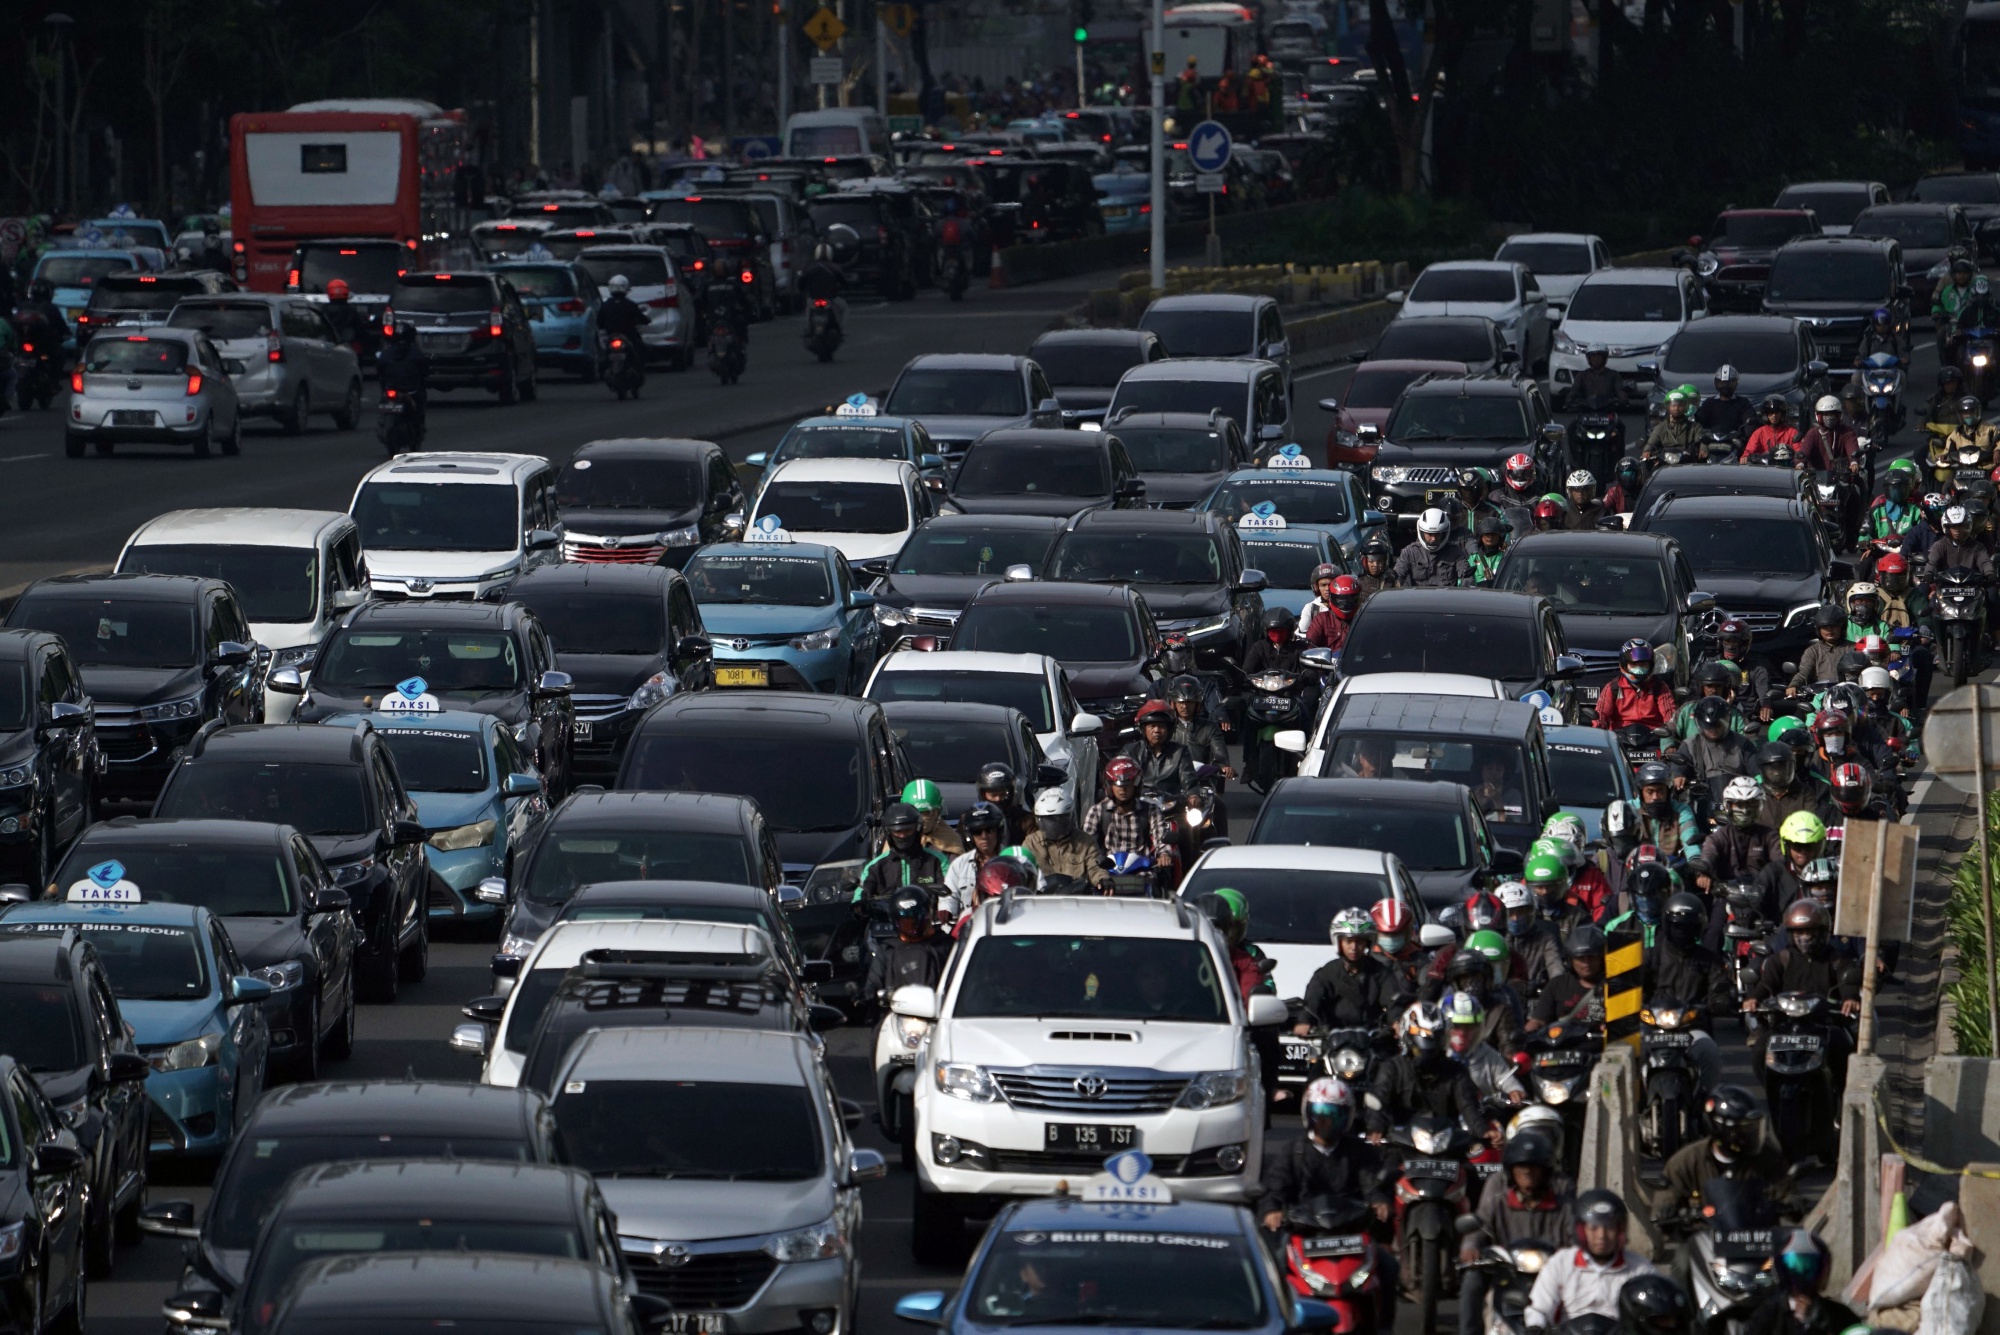 Vehicles travel along a road in Jakarta.